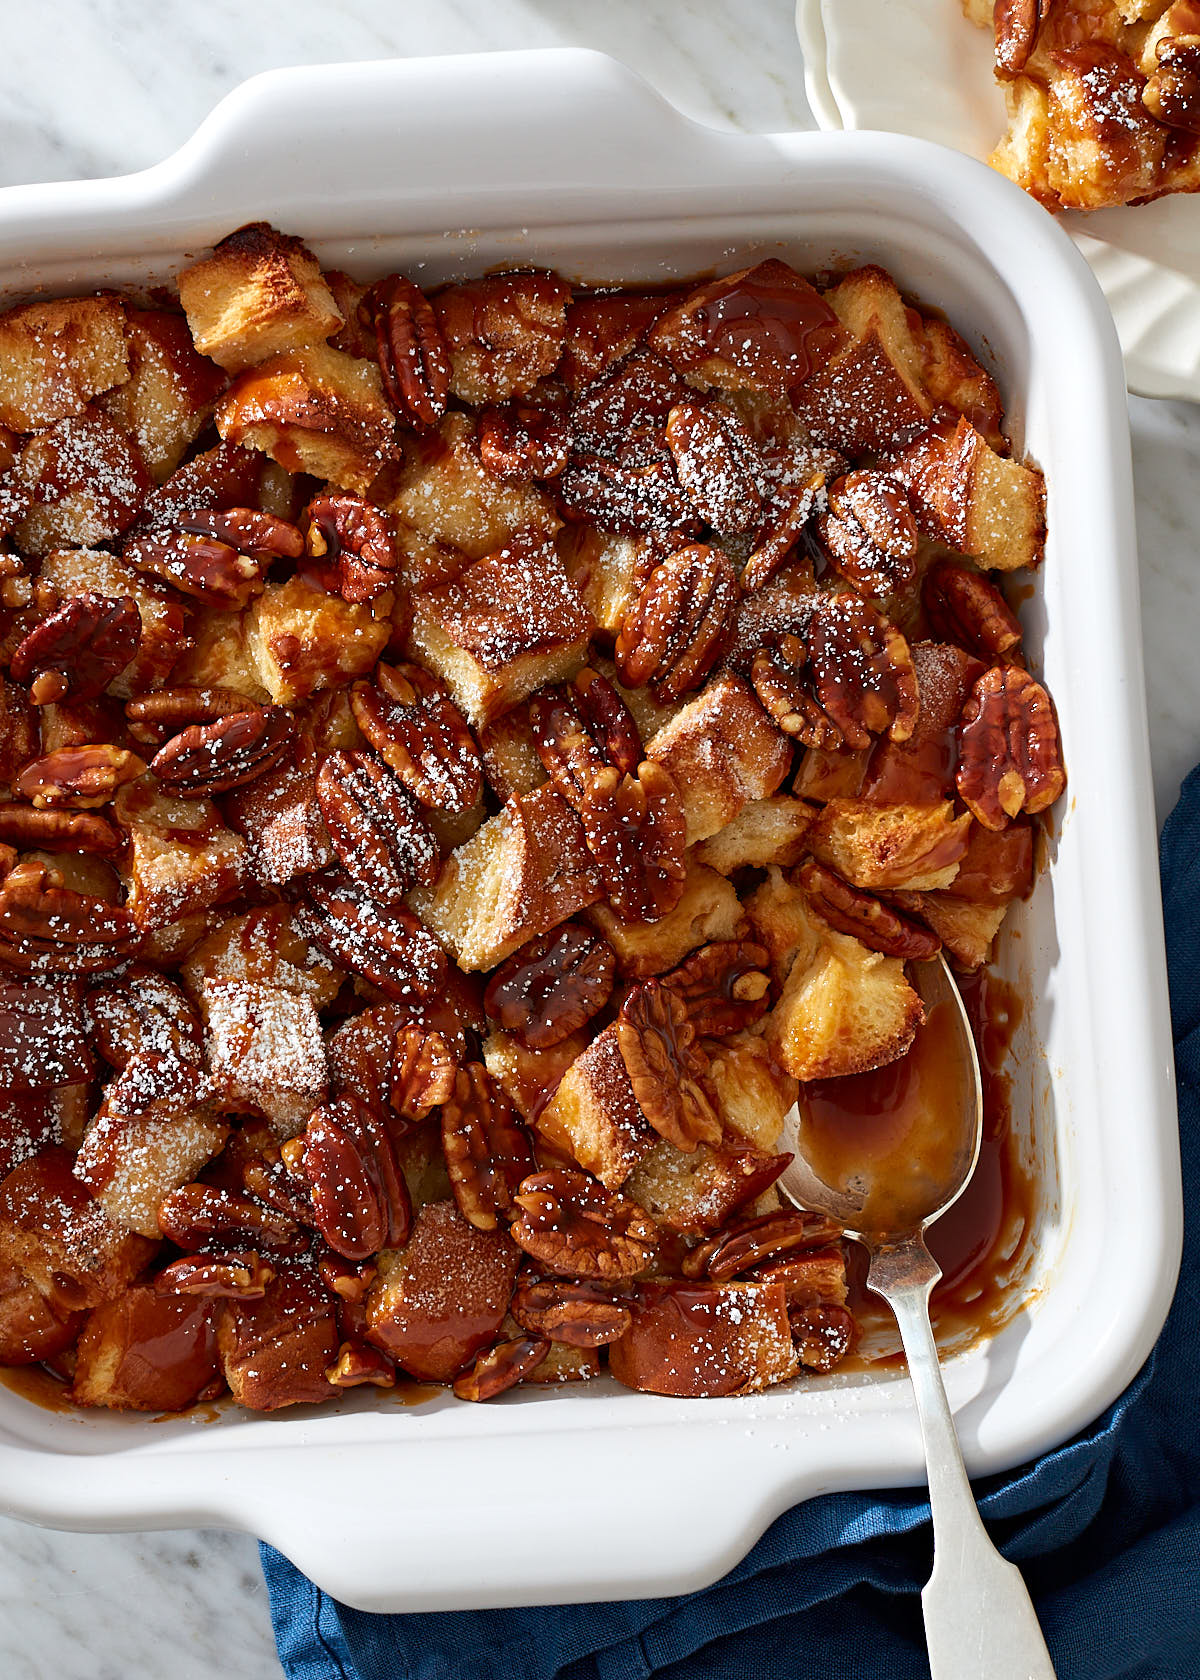 Homemade bread pudding with caramel and pecans in a white ceramic baking dish.